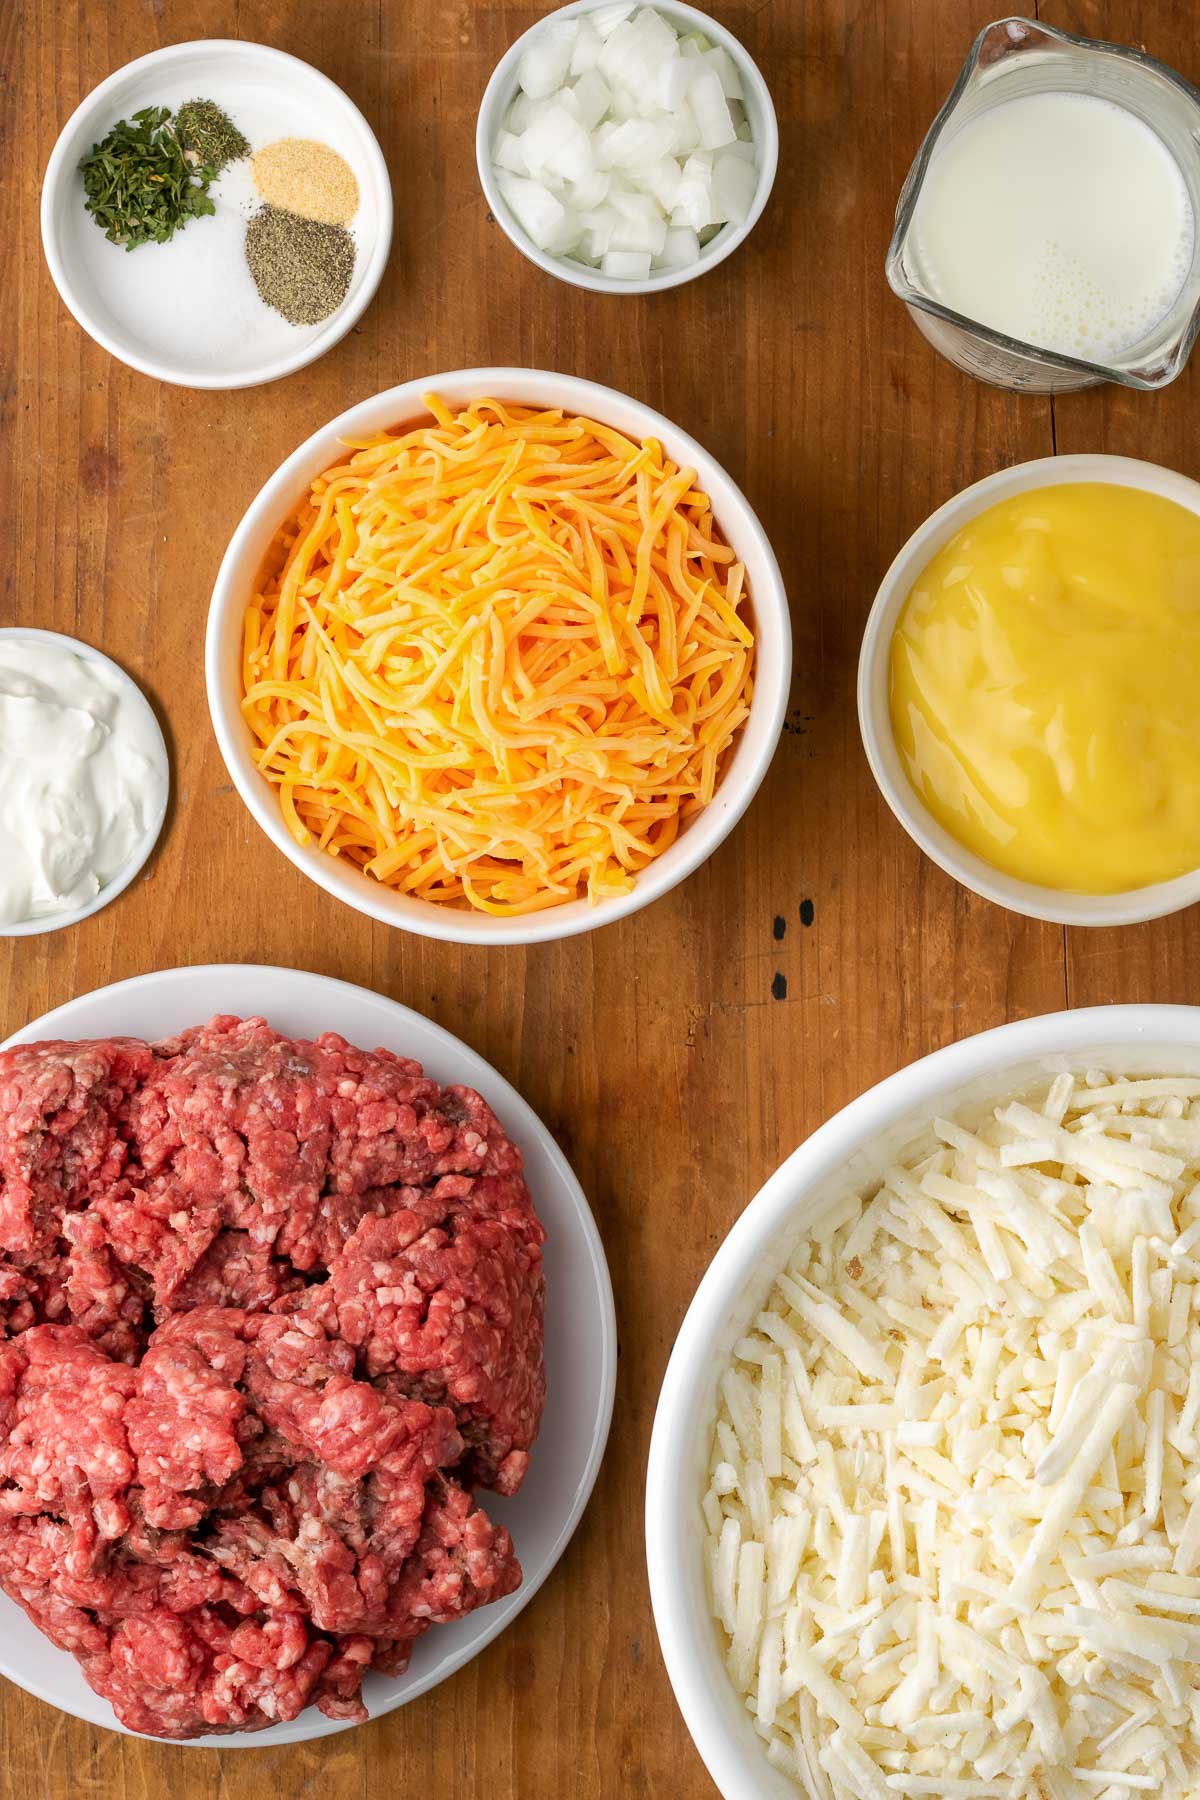 Ingredients for hashbrown casserole in white bowls.